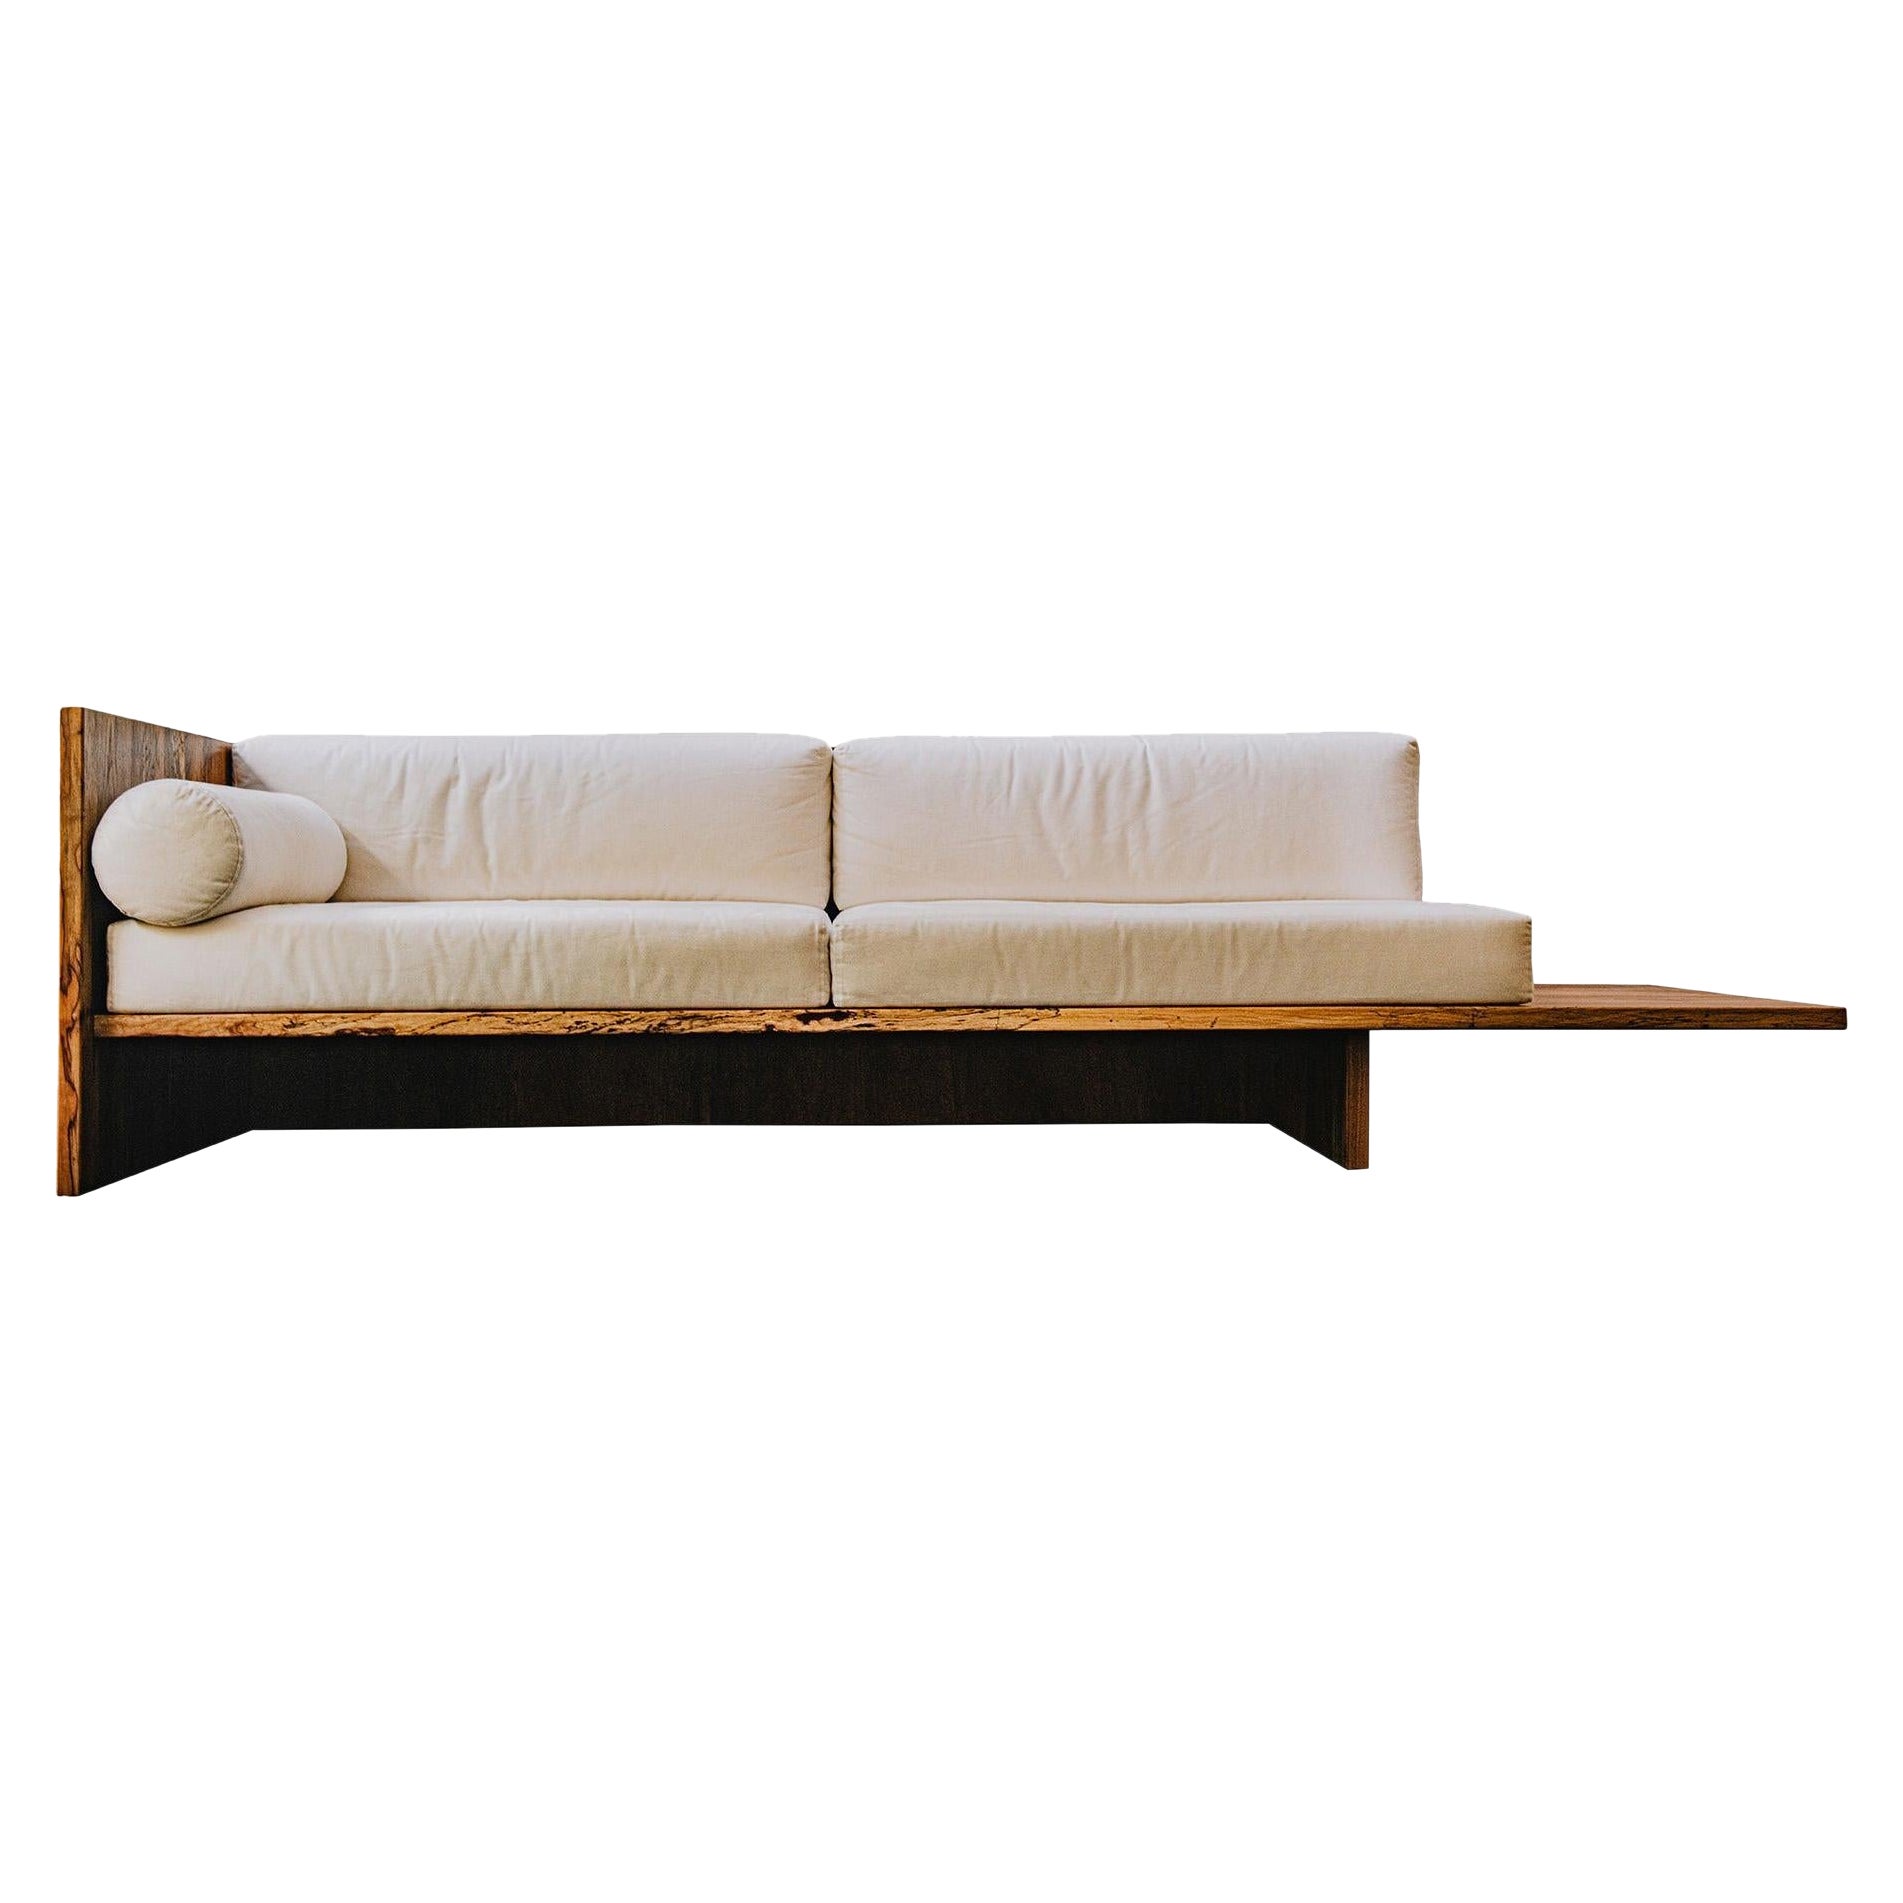 Humphreys Sofa, Solid American Pecan Slab Frame with Extended Shelf For Sale